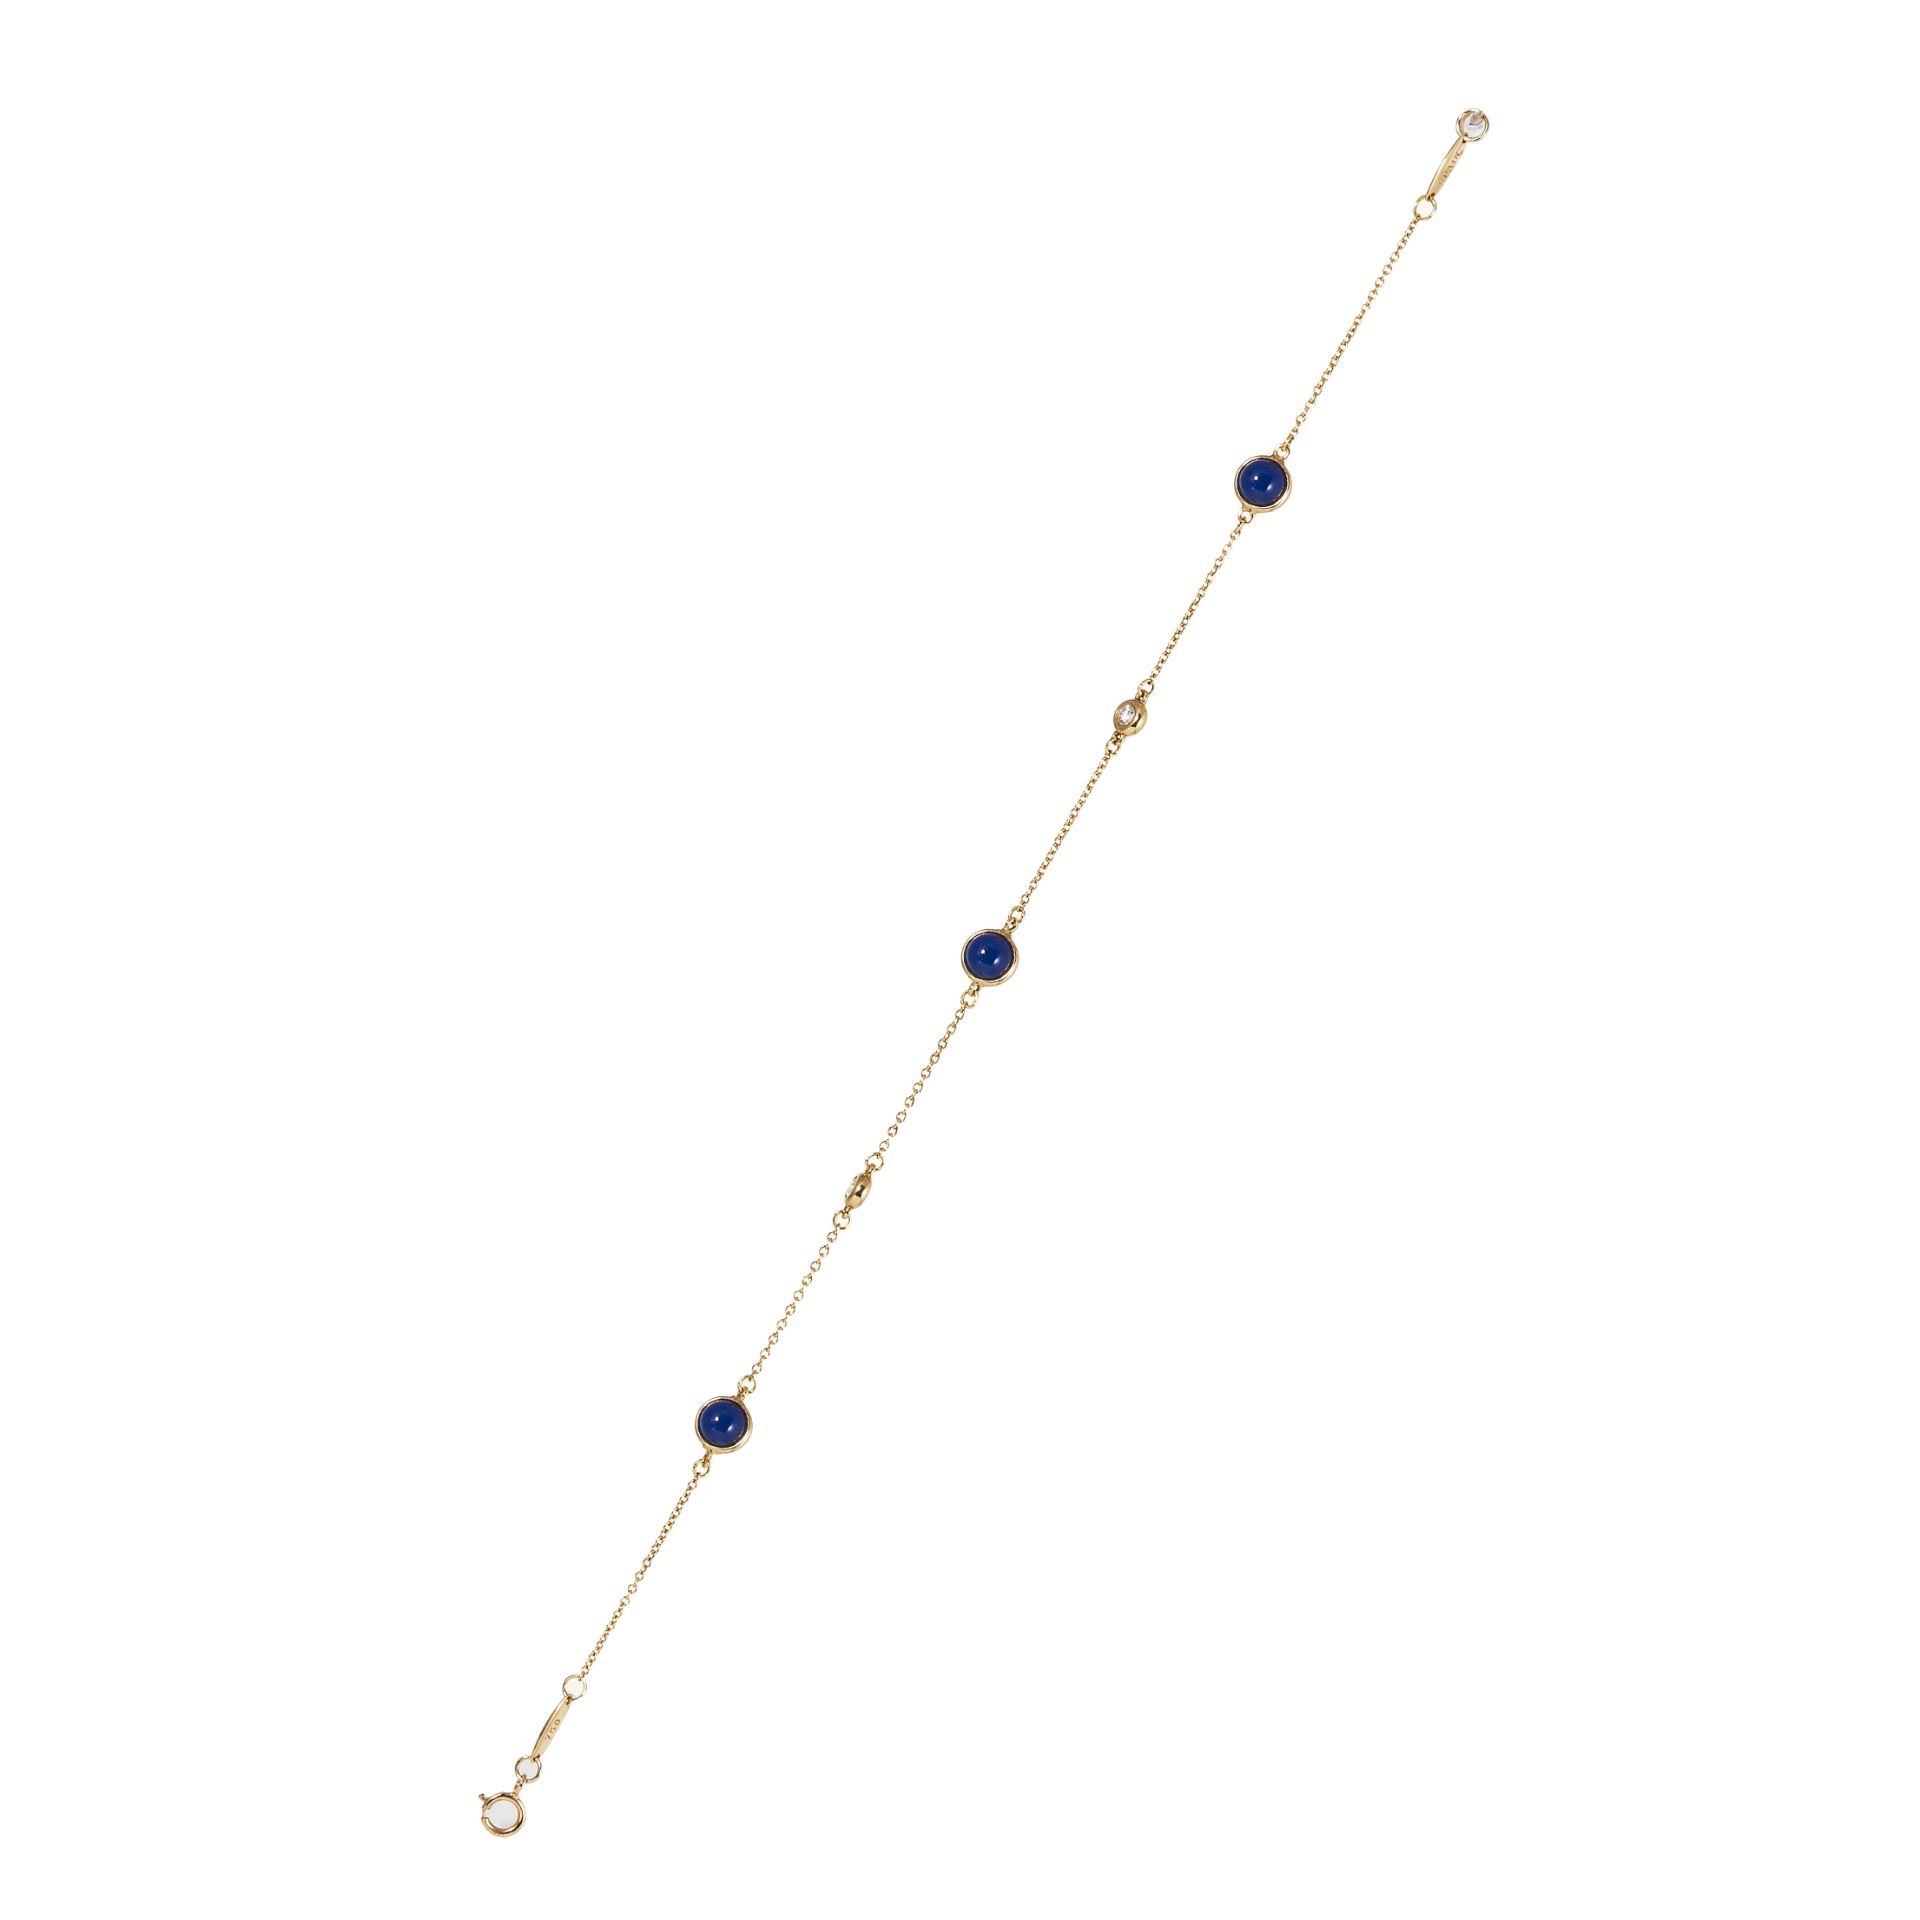 A LAPIS LAZULI AND DIAMOND BRACELET, TIFFANY & CO in 18 carat yellow gold, a fine gold chain holding